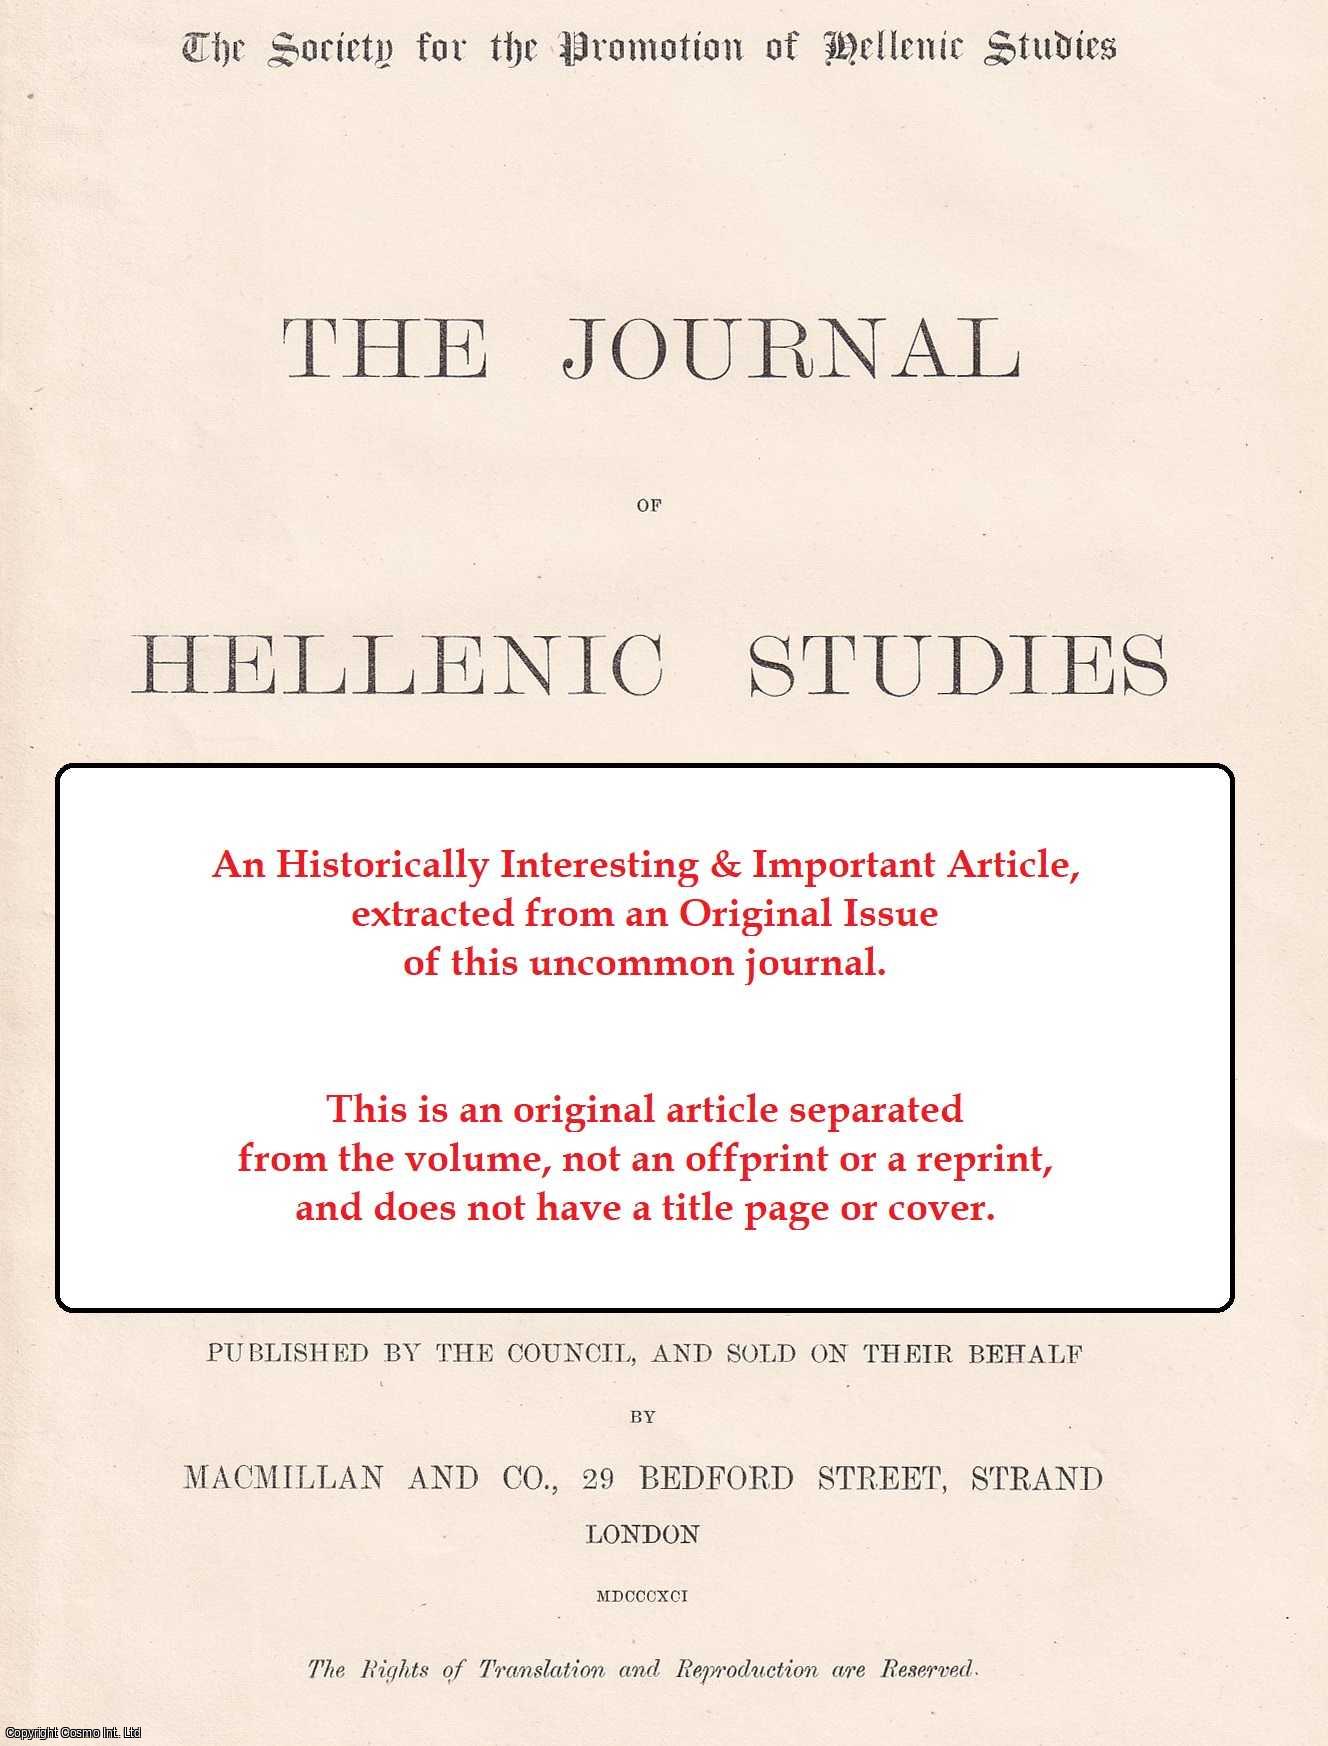 T.W. Allen - The Text of the Homeric Hymns (Part 4). An uncommon original article from the journal of Hellenic studies, 1897.